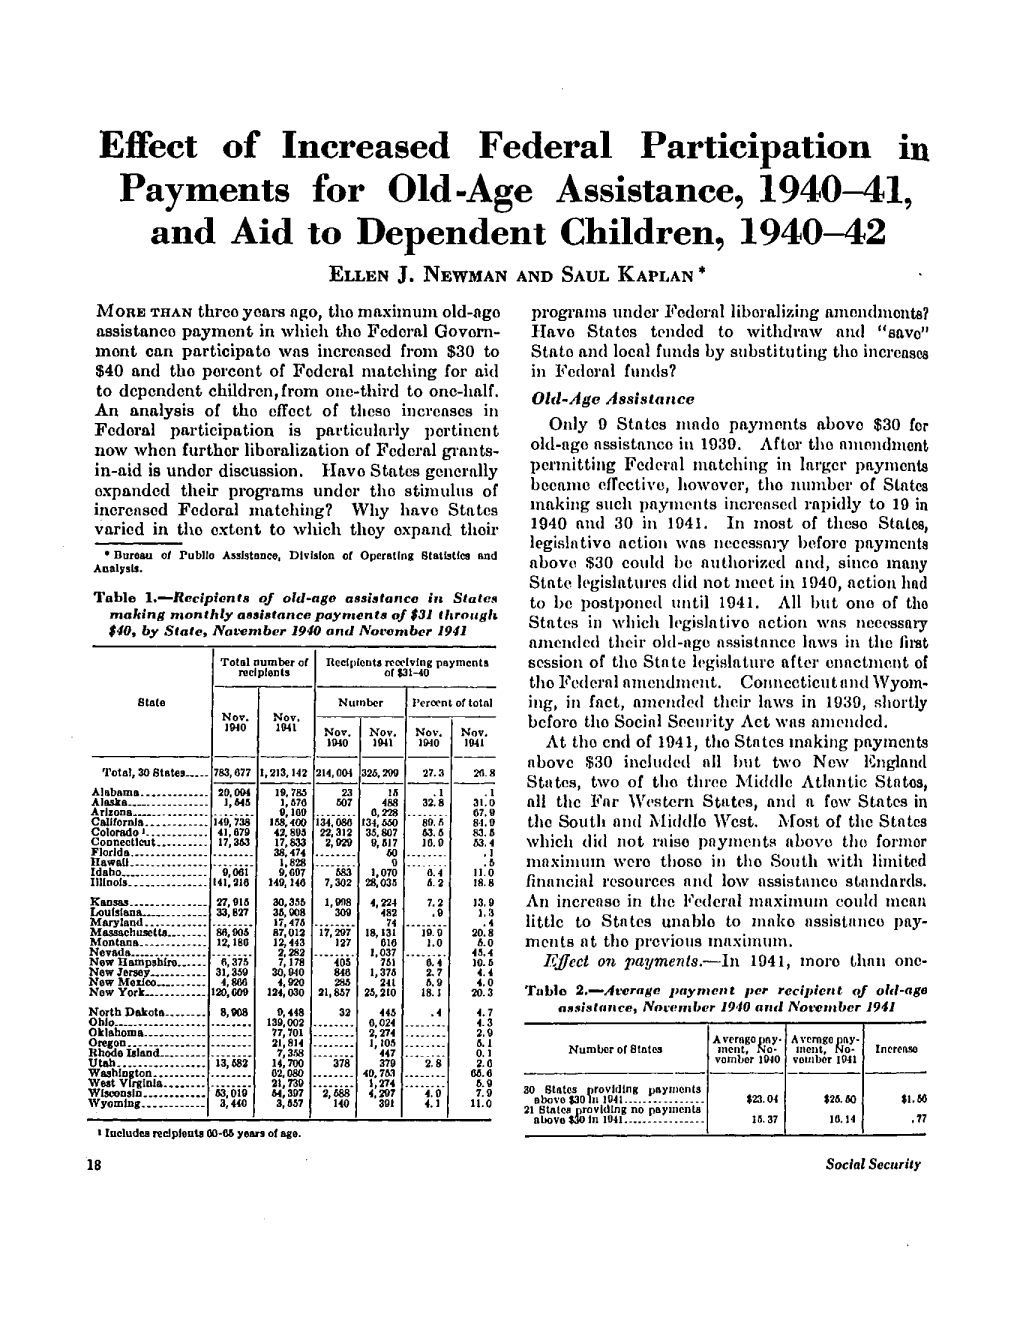 Effect of Increased Federal Participation in Payments for Old-Age Assistance, 1940-41, and Aid to Dependent Children, 1940—42